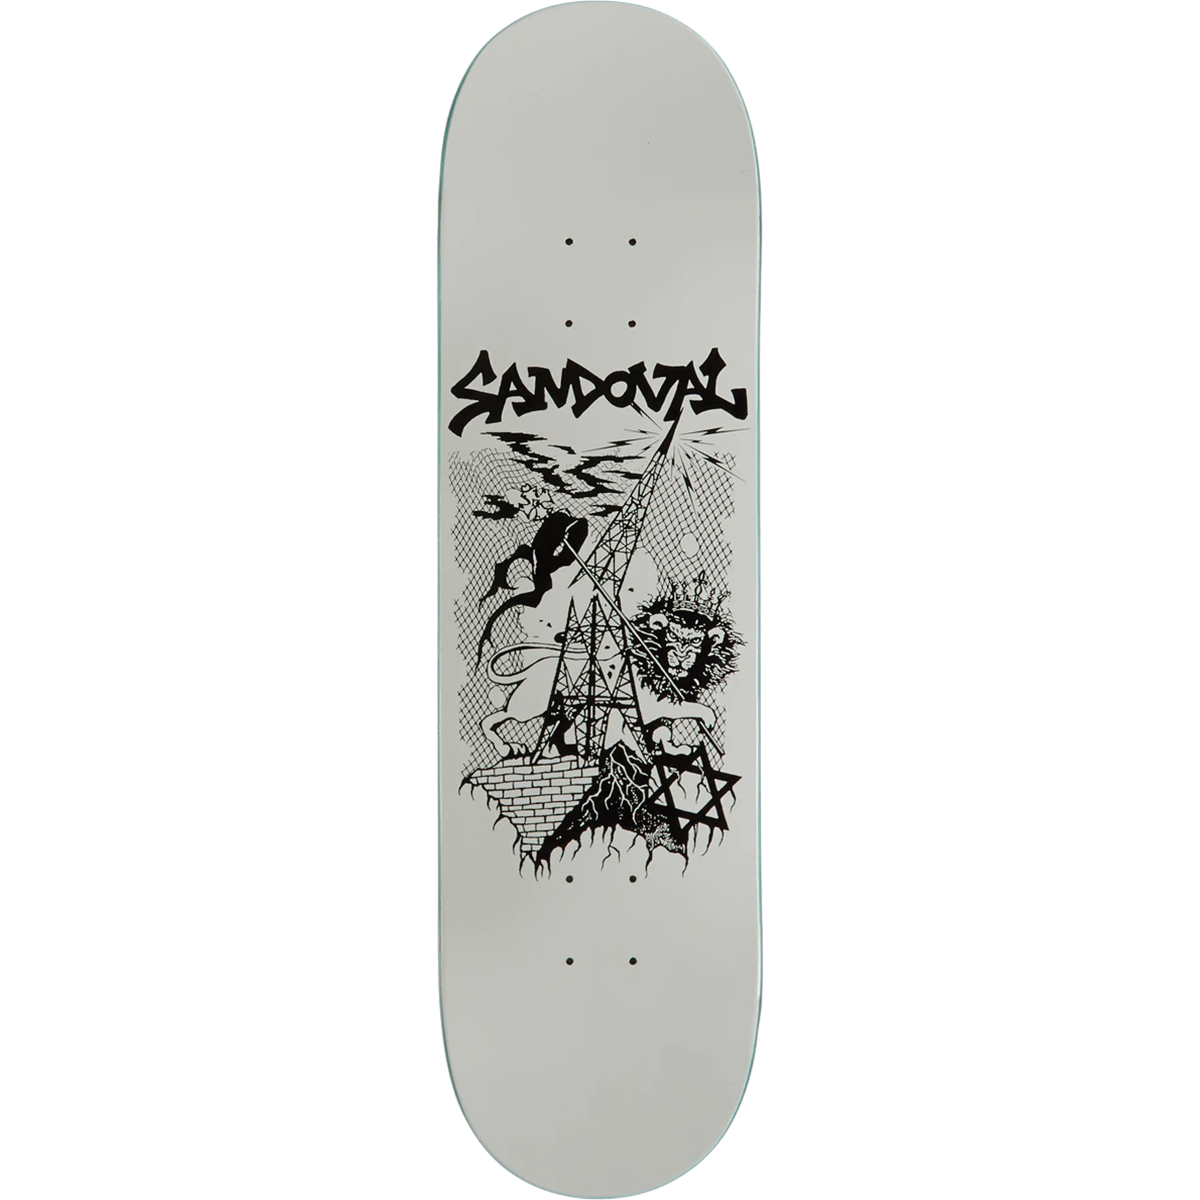 Zero Sandoval End Of Times Skateboard Deck -8.37 DECK ONLY